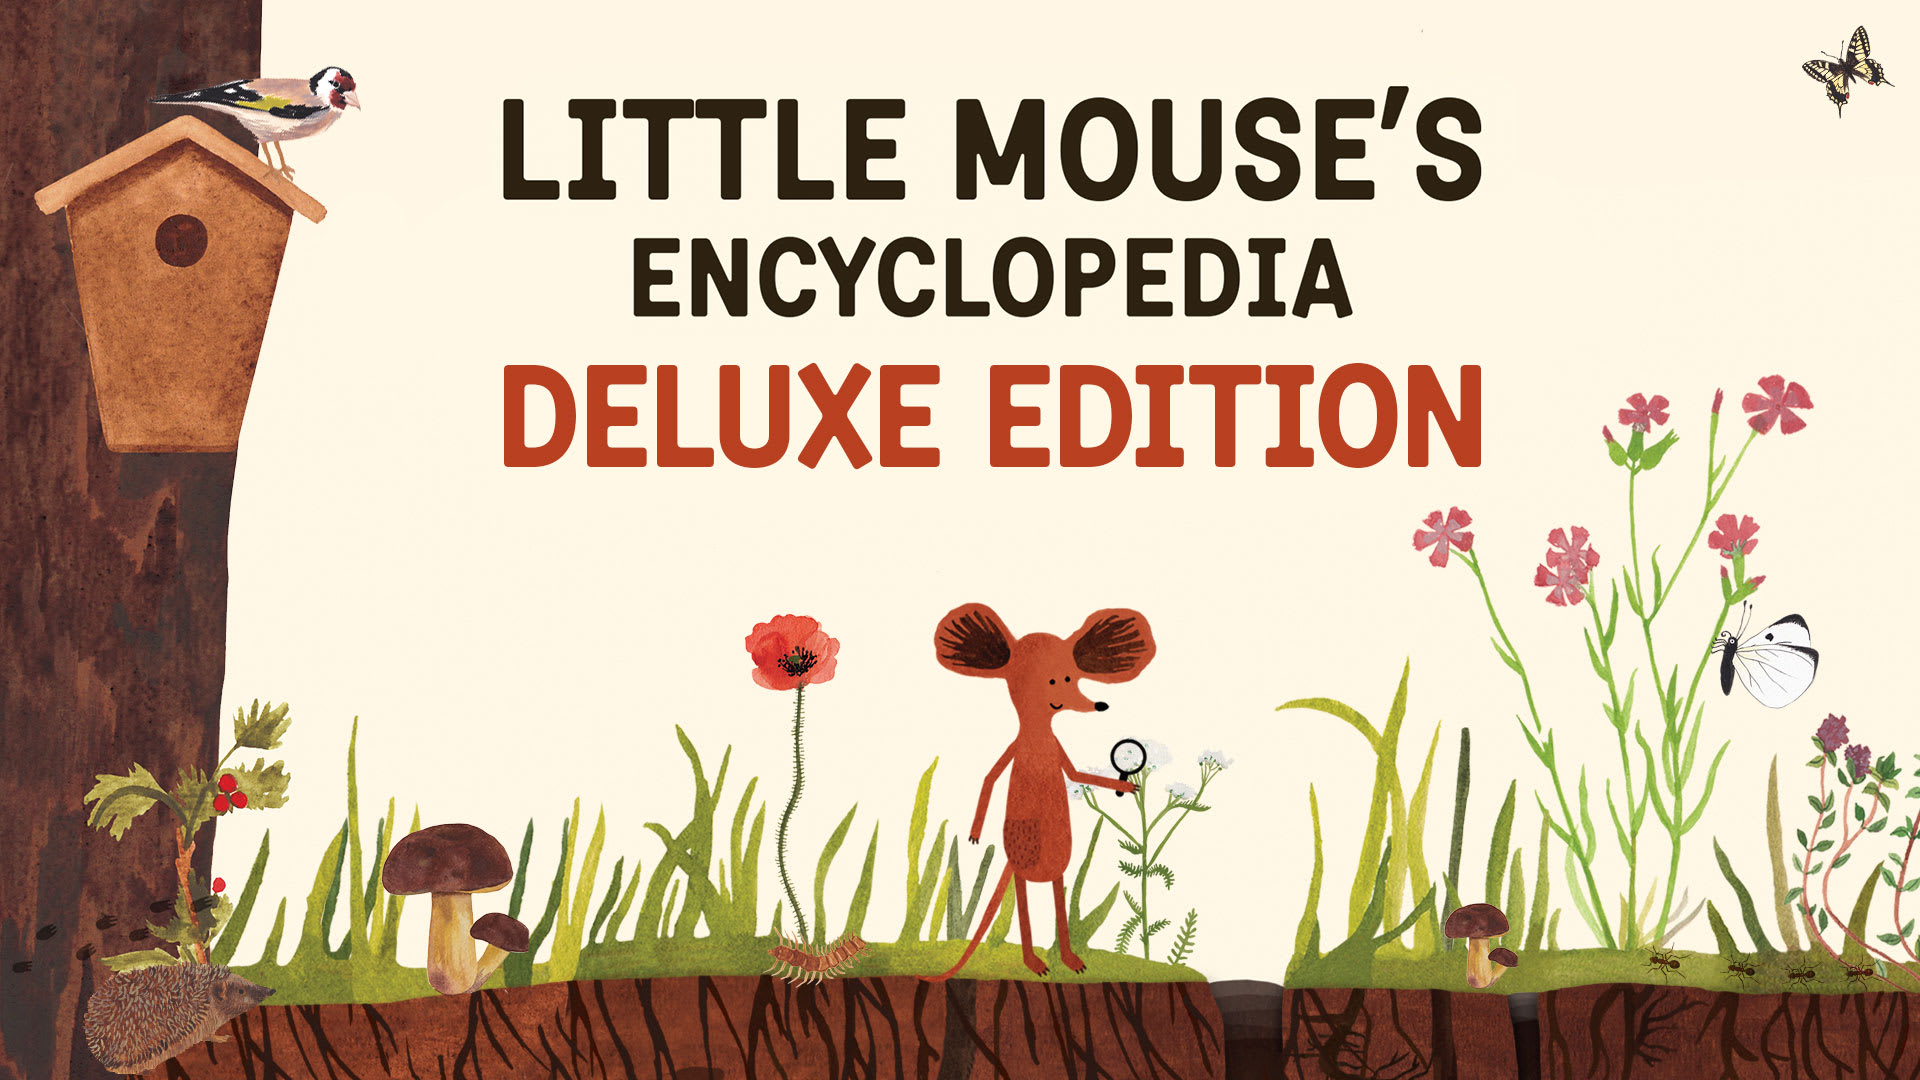 Little Mouse's Encyclopedia Deluxe Edition